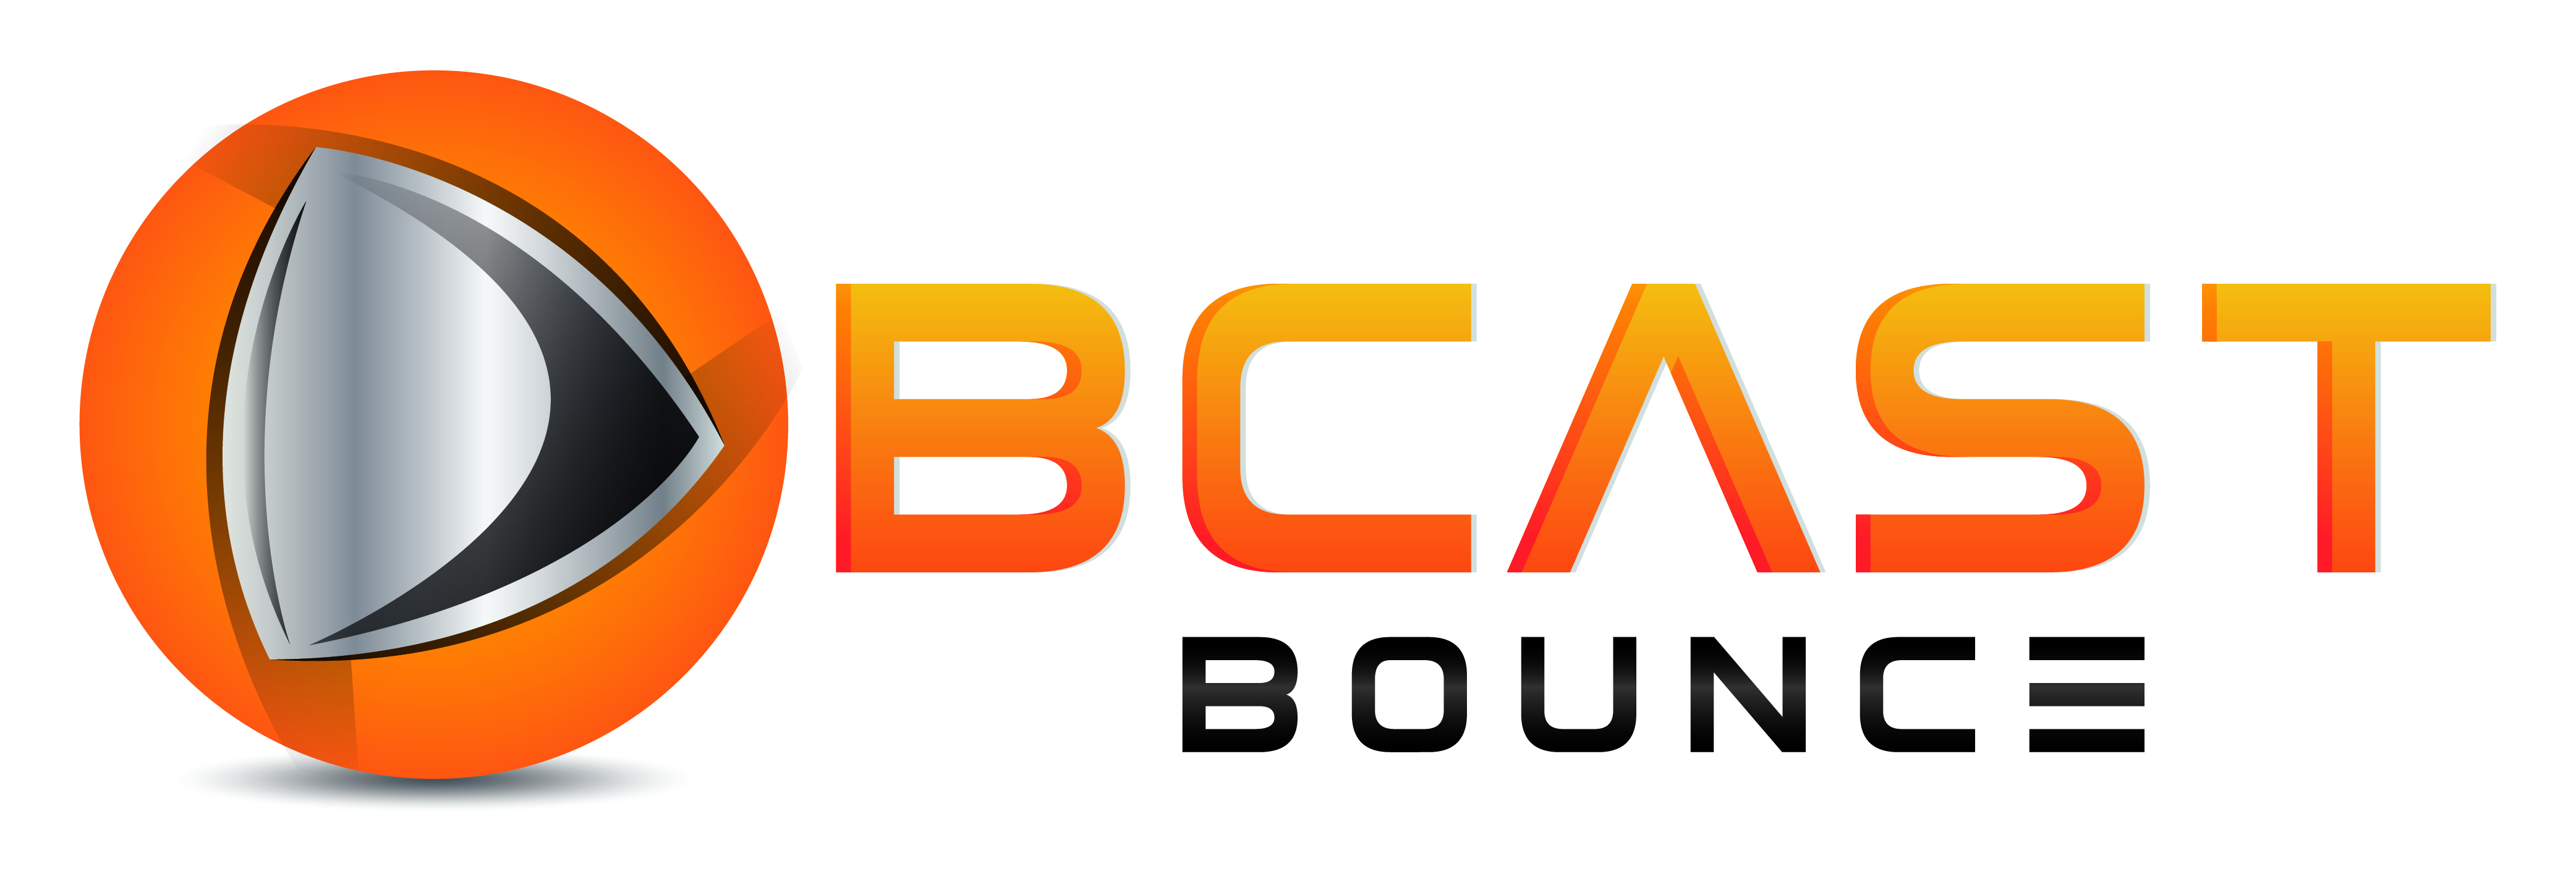 Real World Interactive Media, LLC, Launches BCAST.com, a Short Form Video Platform with "Bounce Invite Video" Feature